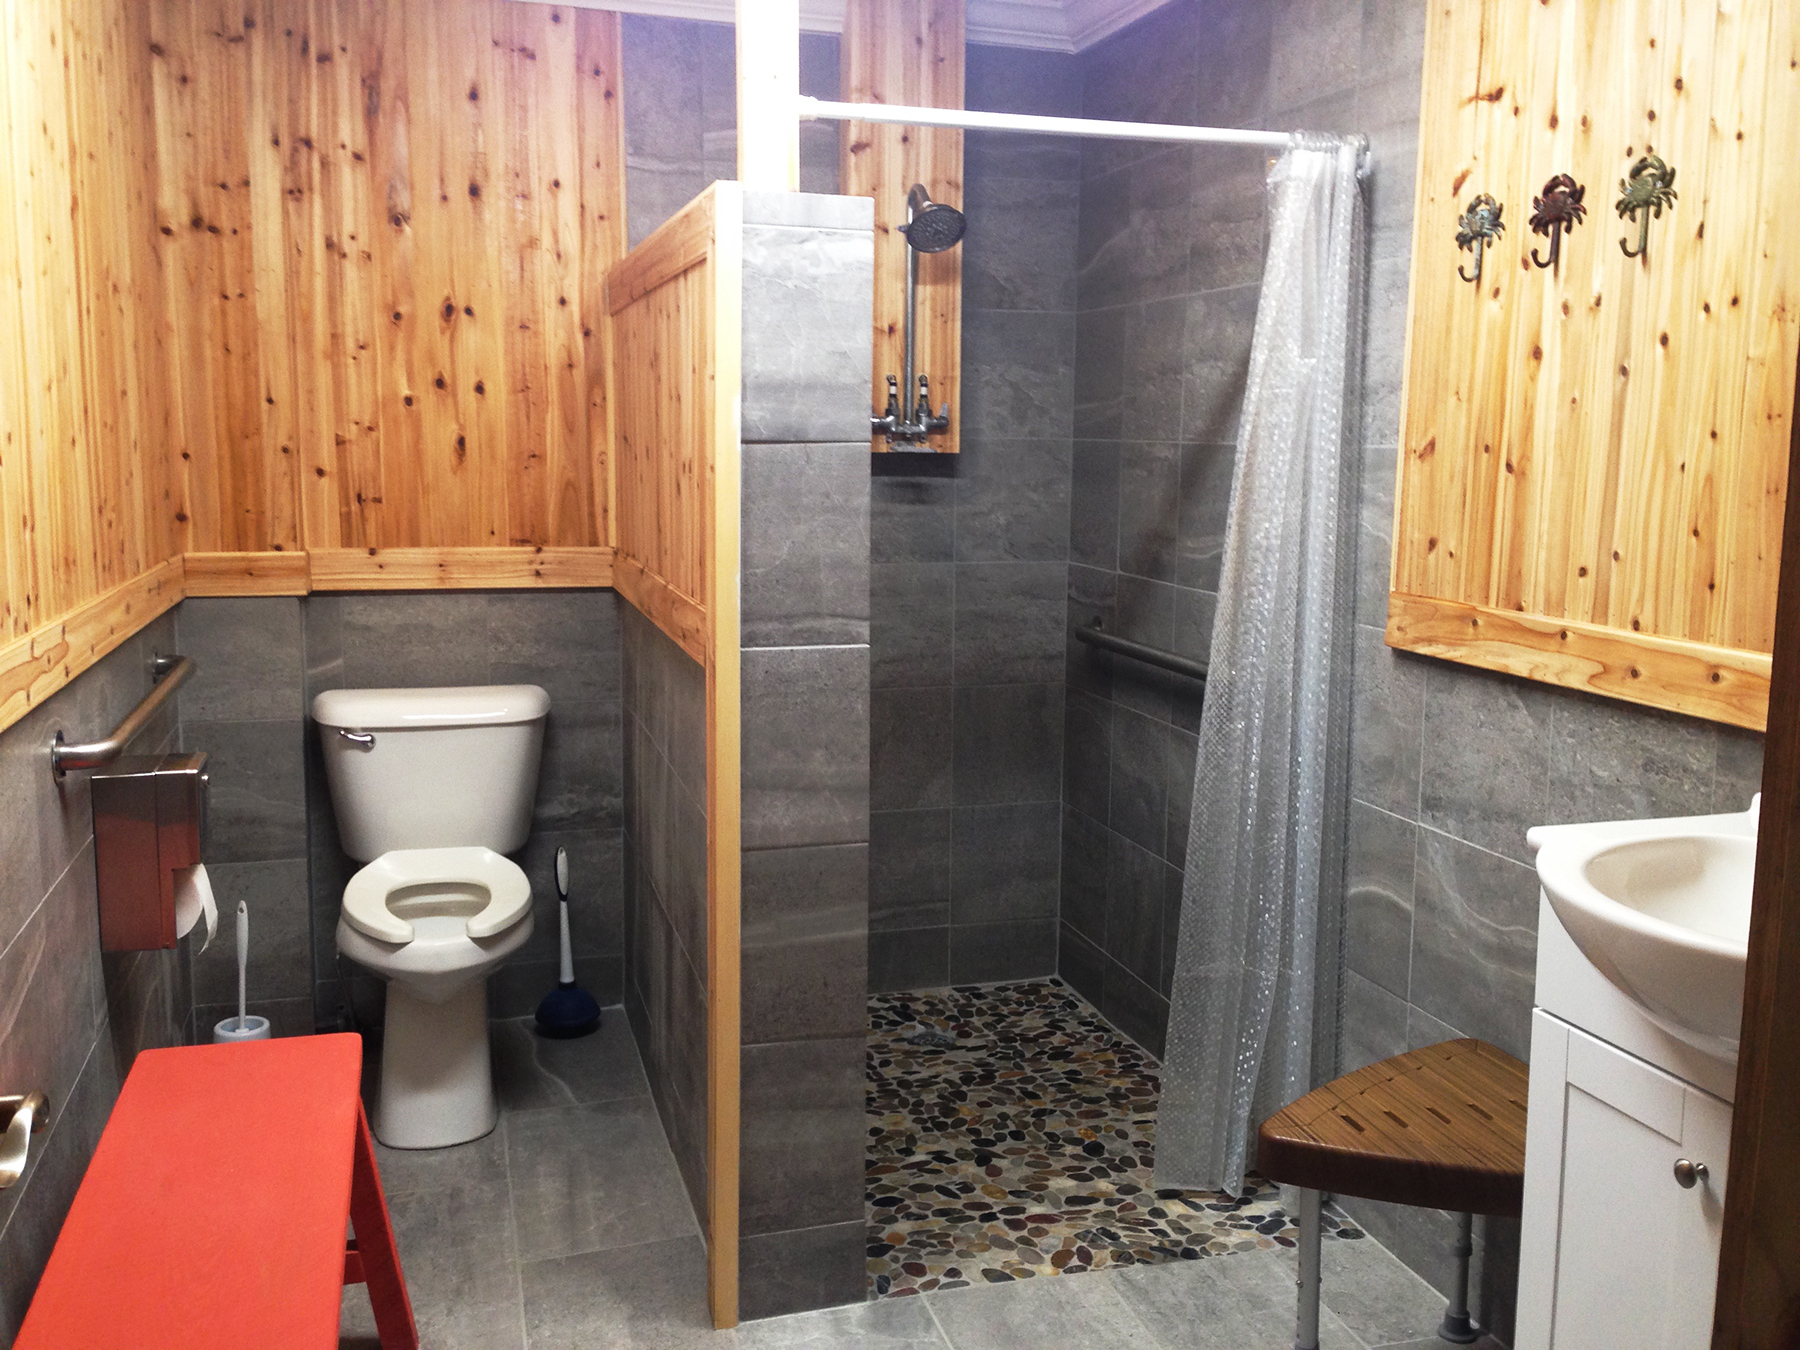 Newly Remodeled Restrooms and Showers